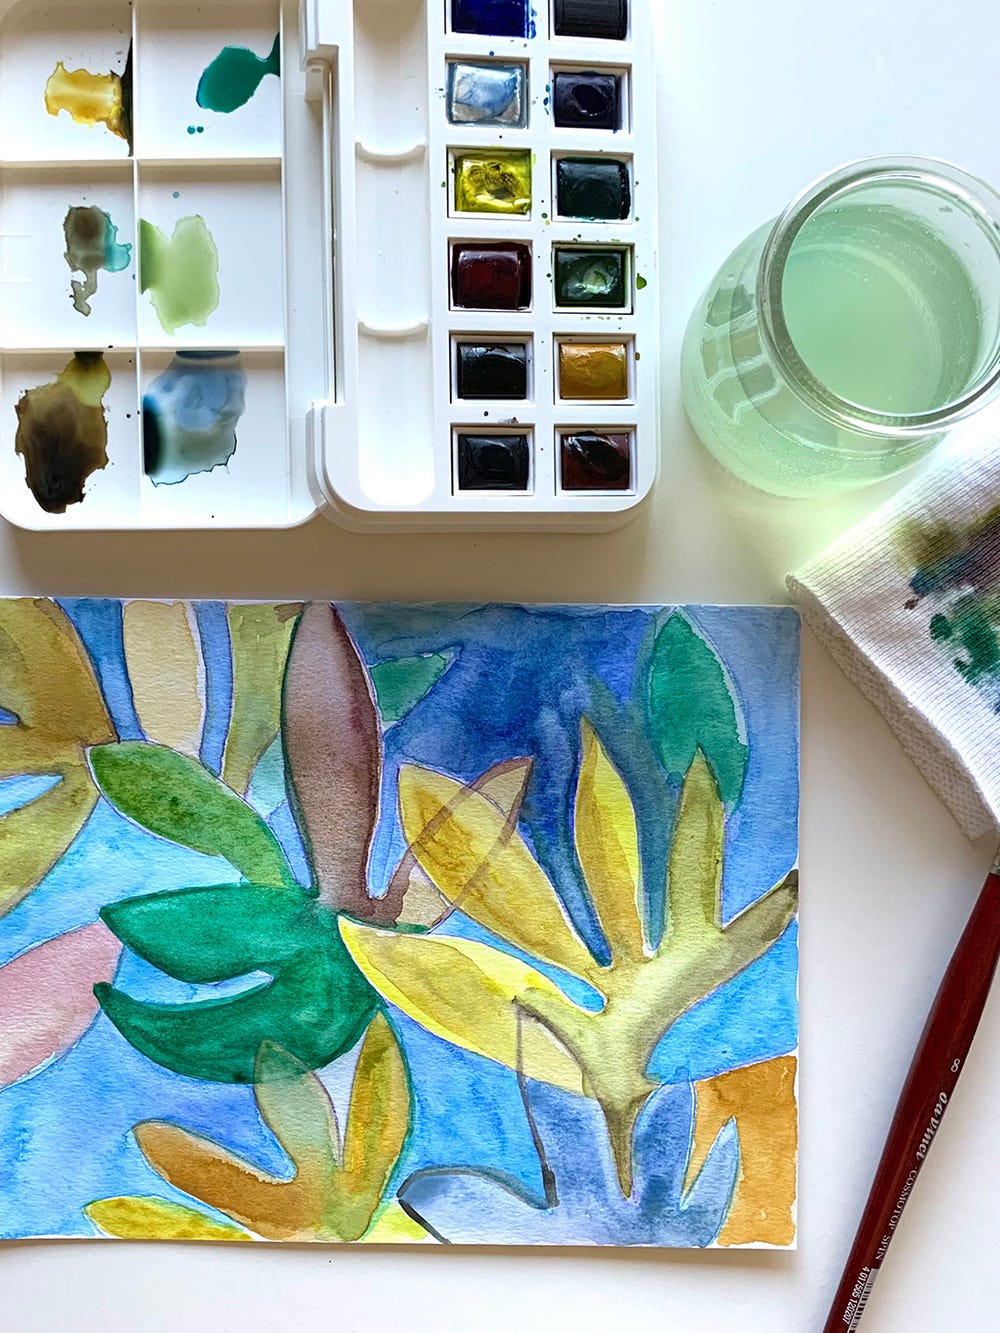 Paint and brush set next to colorful painting of leaves and flowers